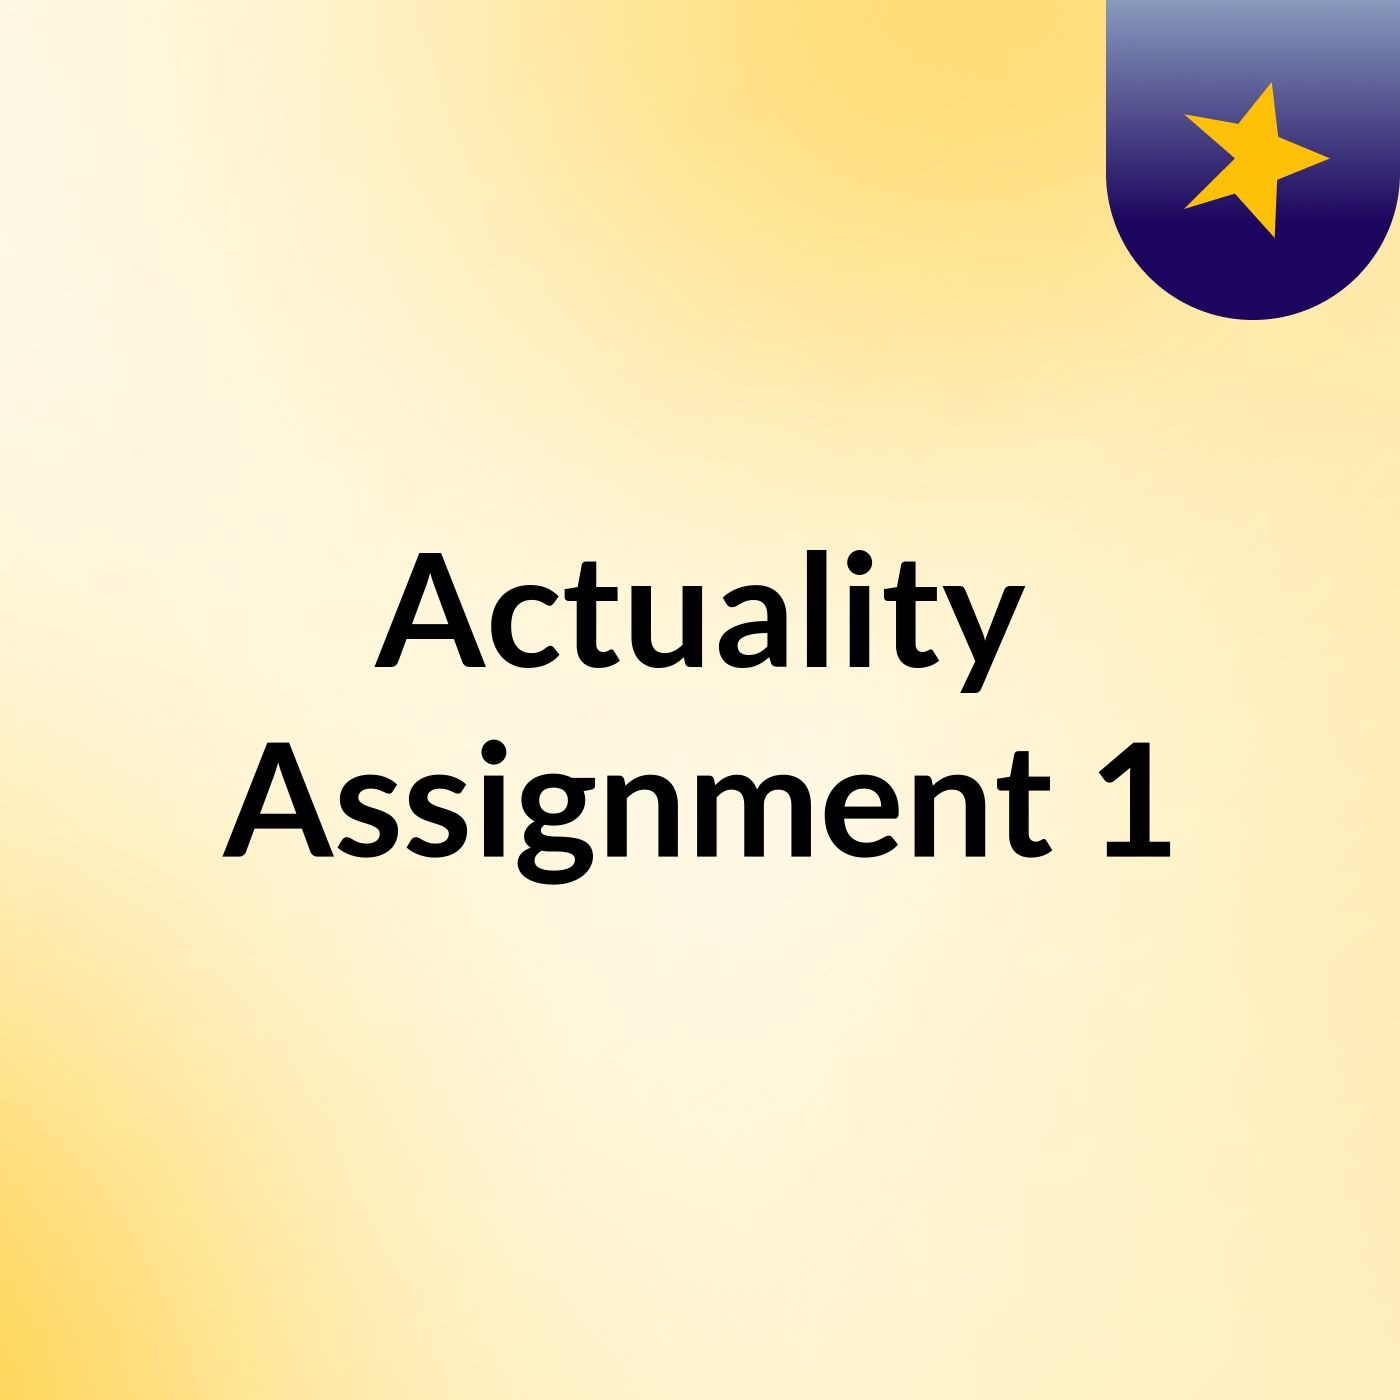 Actuality Assignment 1